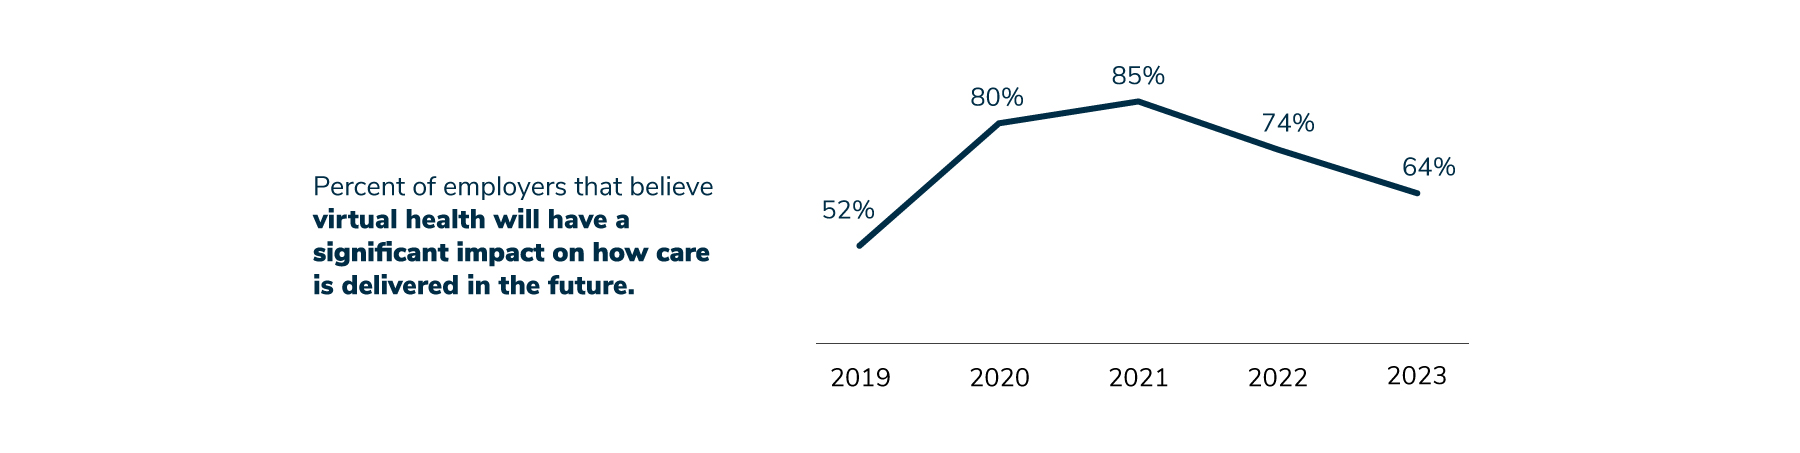 The percentage of employers that believe that virtual care will have a significant or very significant impact on how health care is delivered over the next 3-5 years, increased from 52% in 2019 to 85% in 2021, and then decreased to 74% in 2022 and 64% in 2023.The percentage of employers that believe that virtual care will have a significant or very significant impact on how health care is delivered over the next 3-5 years, increased from 52% in 2019 to 85% in 2021, and then decreased to 74% in 2022 and 64% in 2023.